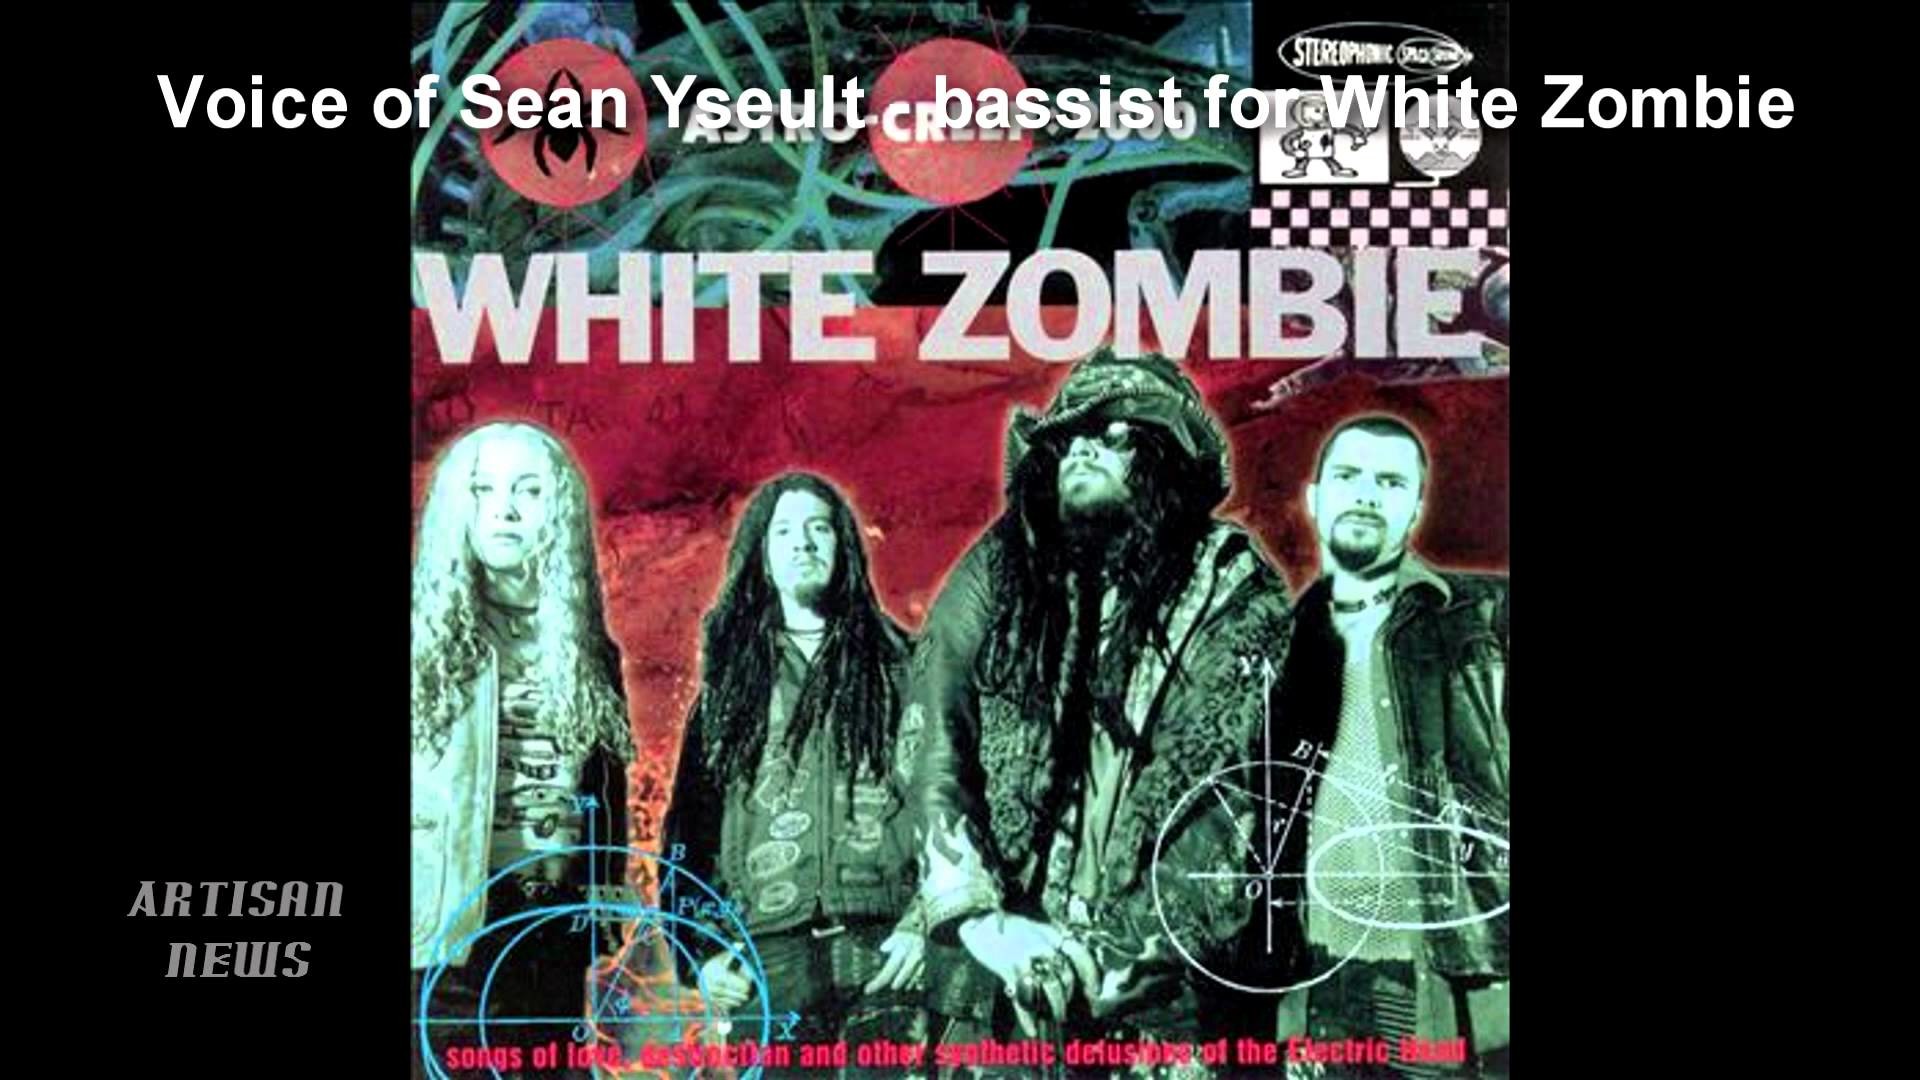 1920x1080 WHITE ZOMBIE TO RELEASE NEW BOX SET, SAYS EX-BASSIST SEAN YSEULT